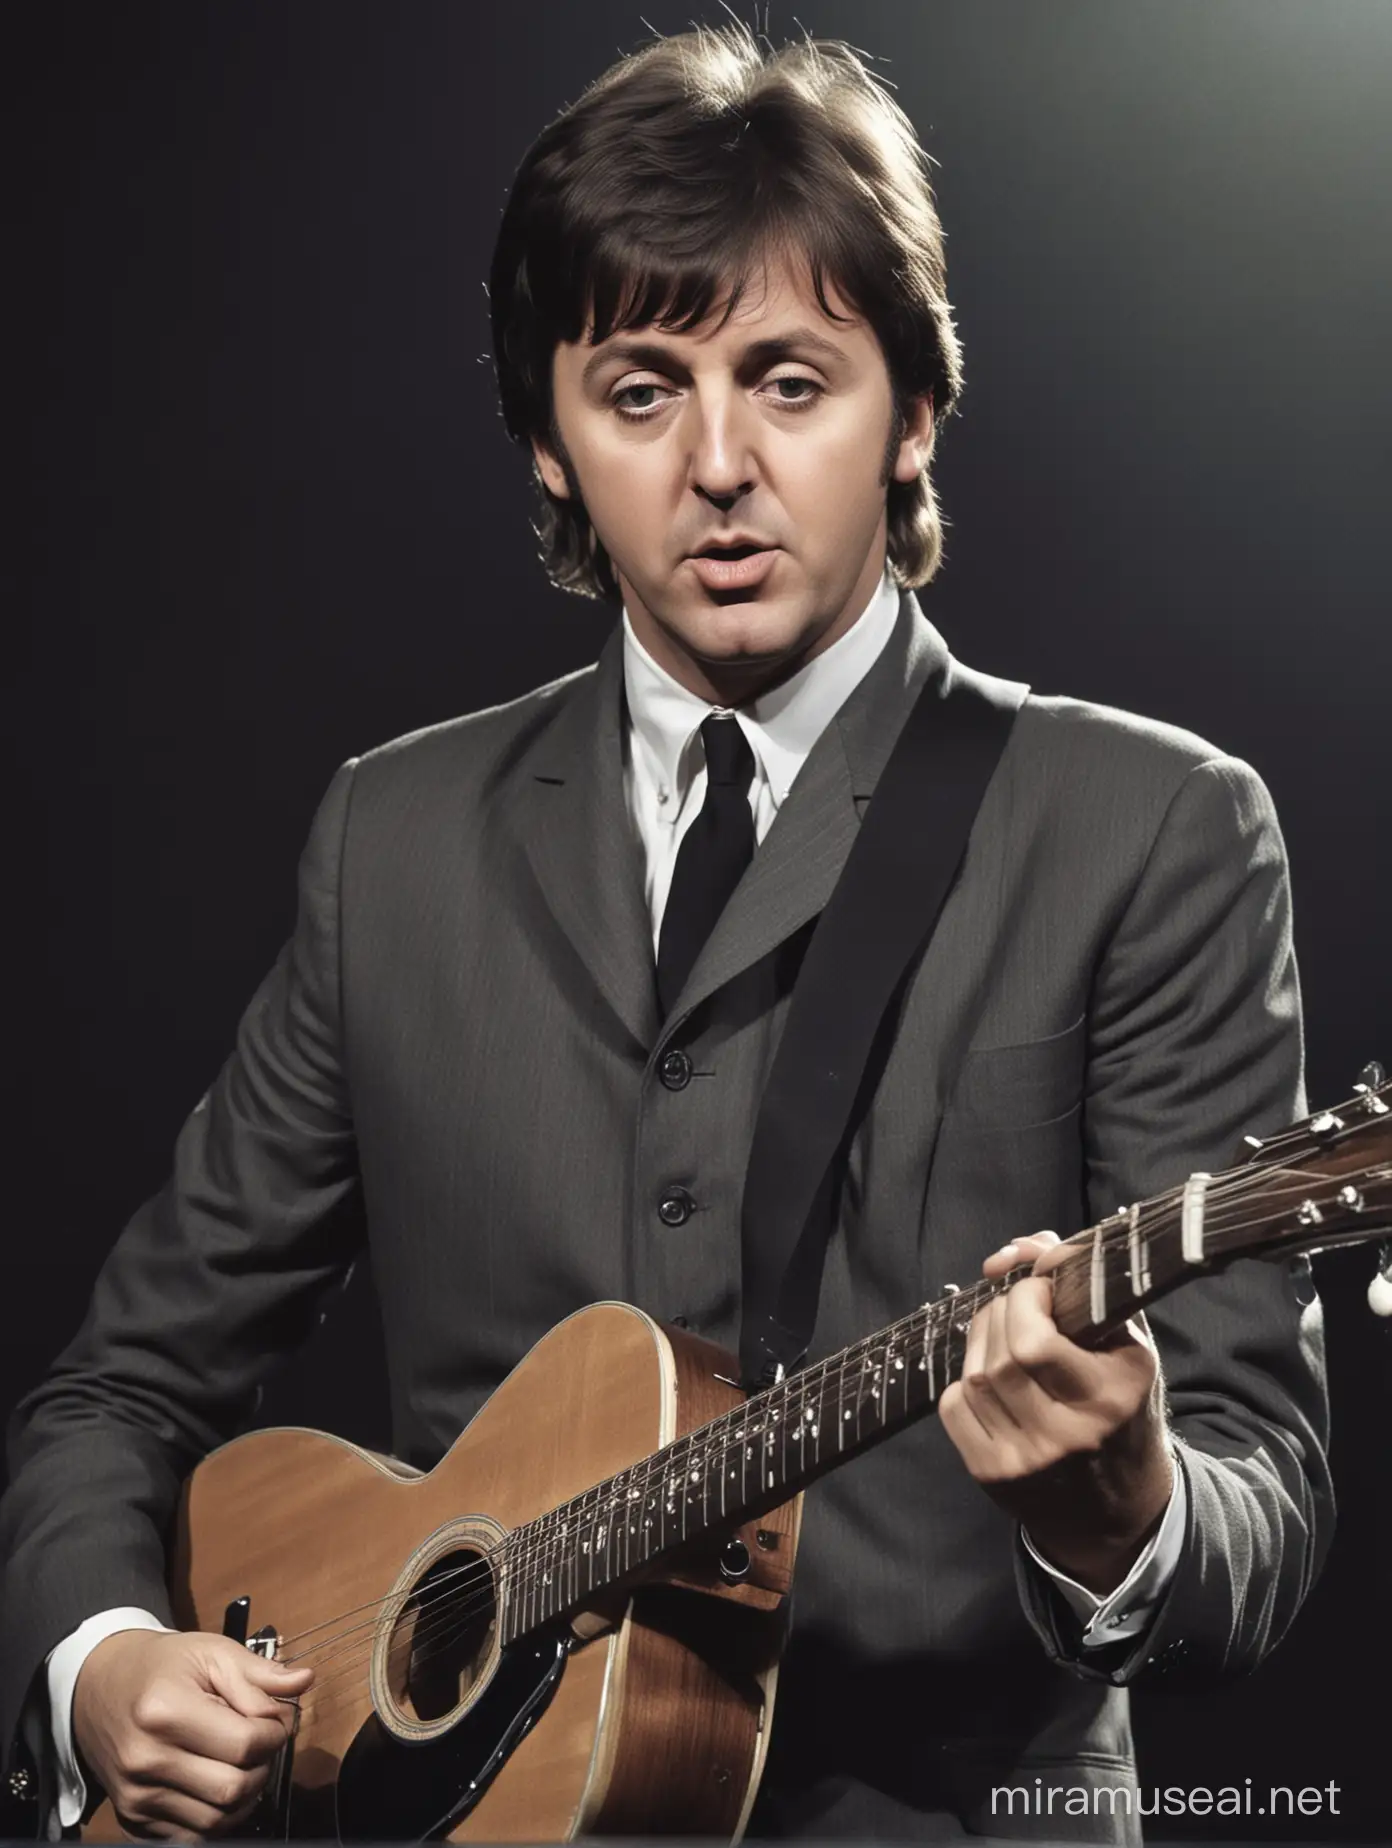 Paul McCartney 1965 Solo Performance with LeftHanded Acoustic Guitar